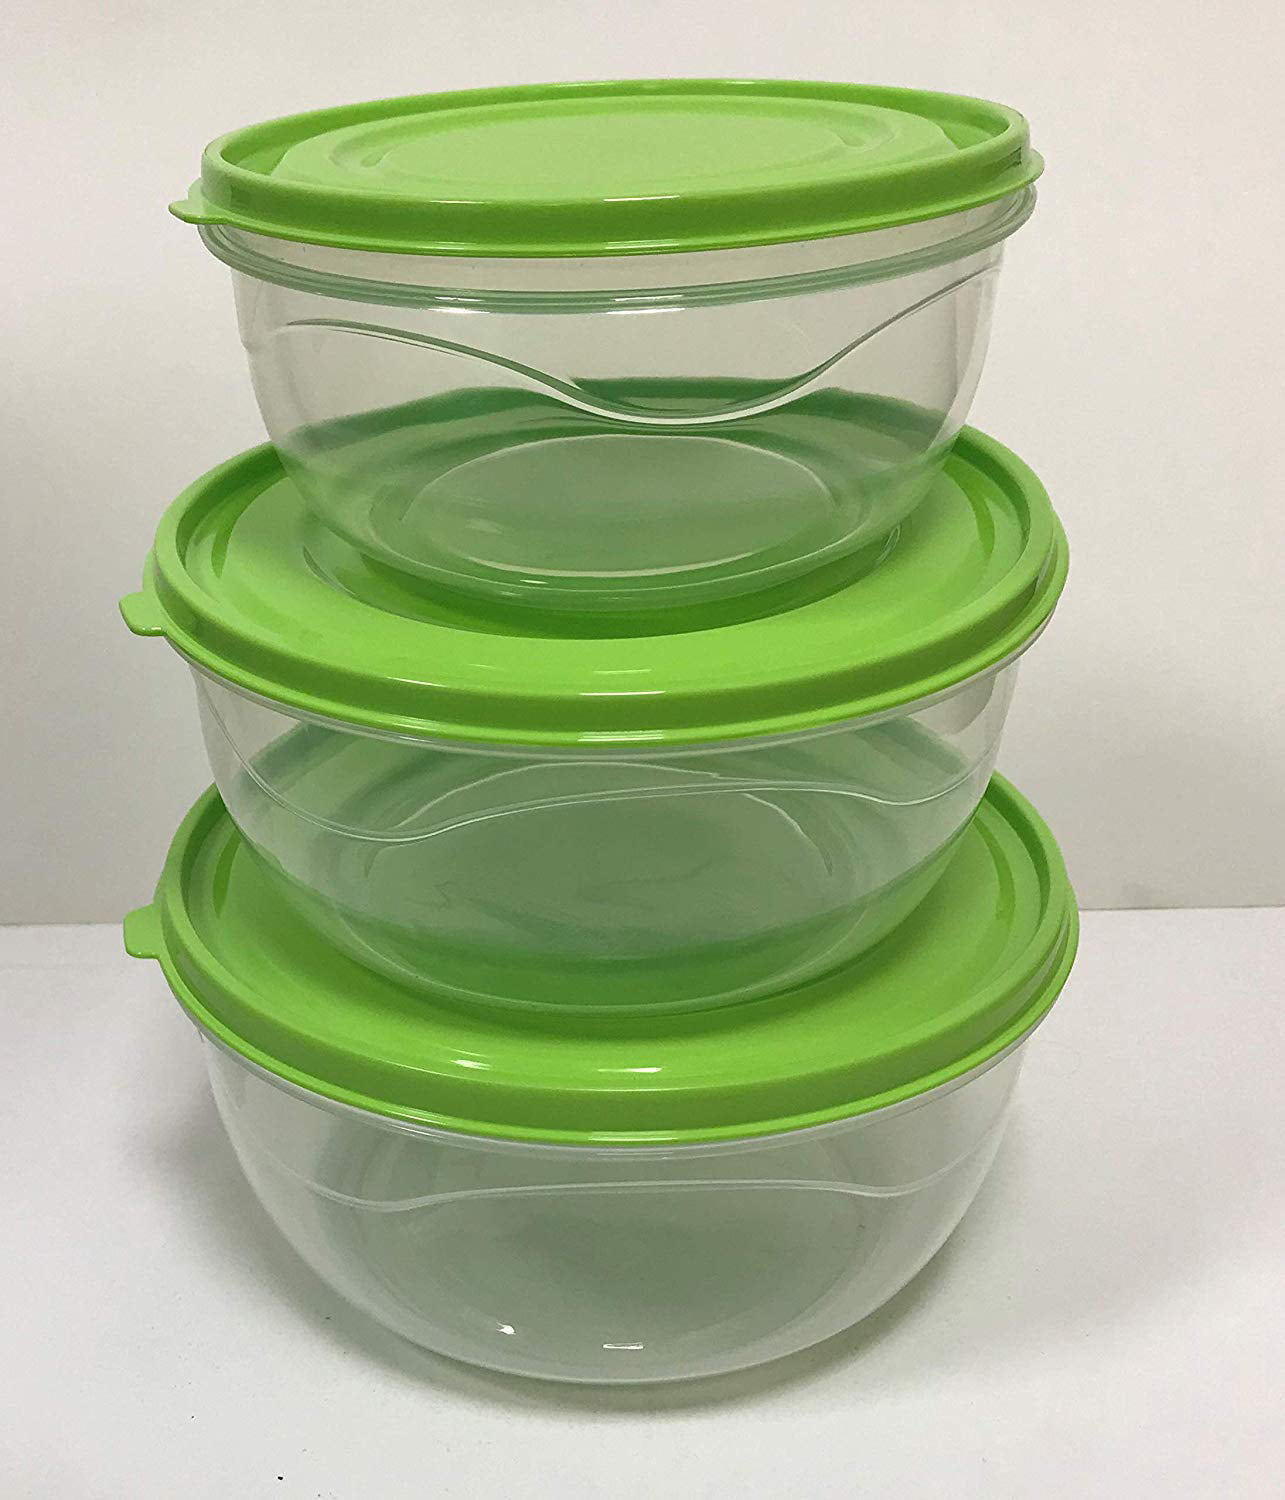 Small Plastic Storage Containers With Lids - All information about